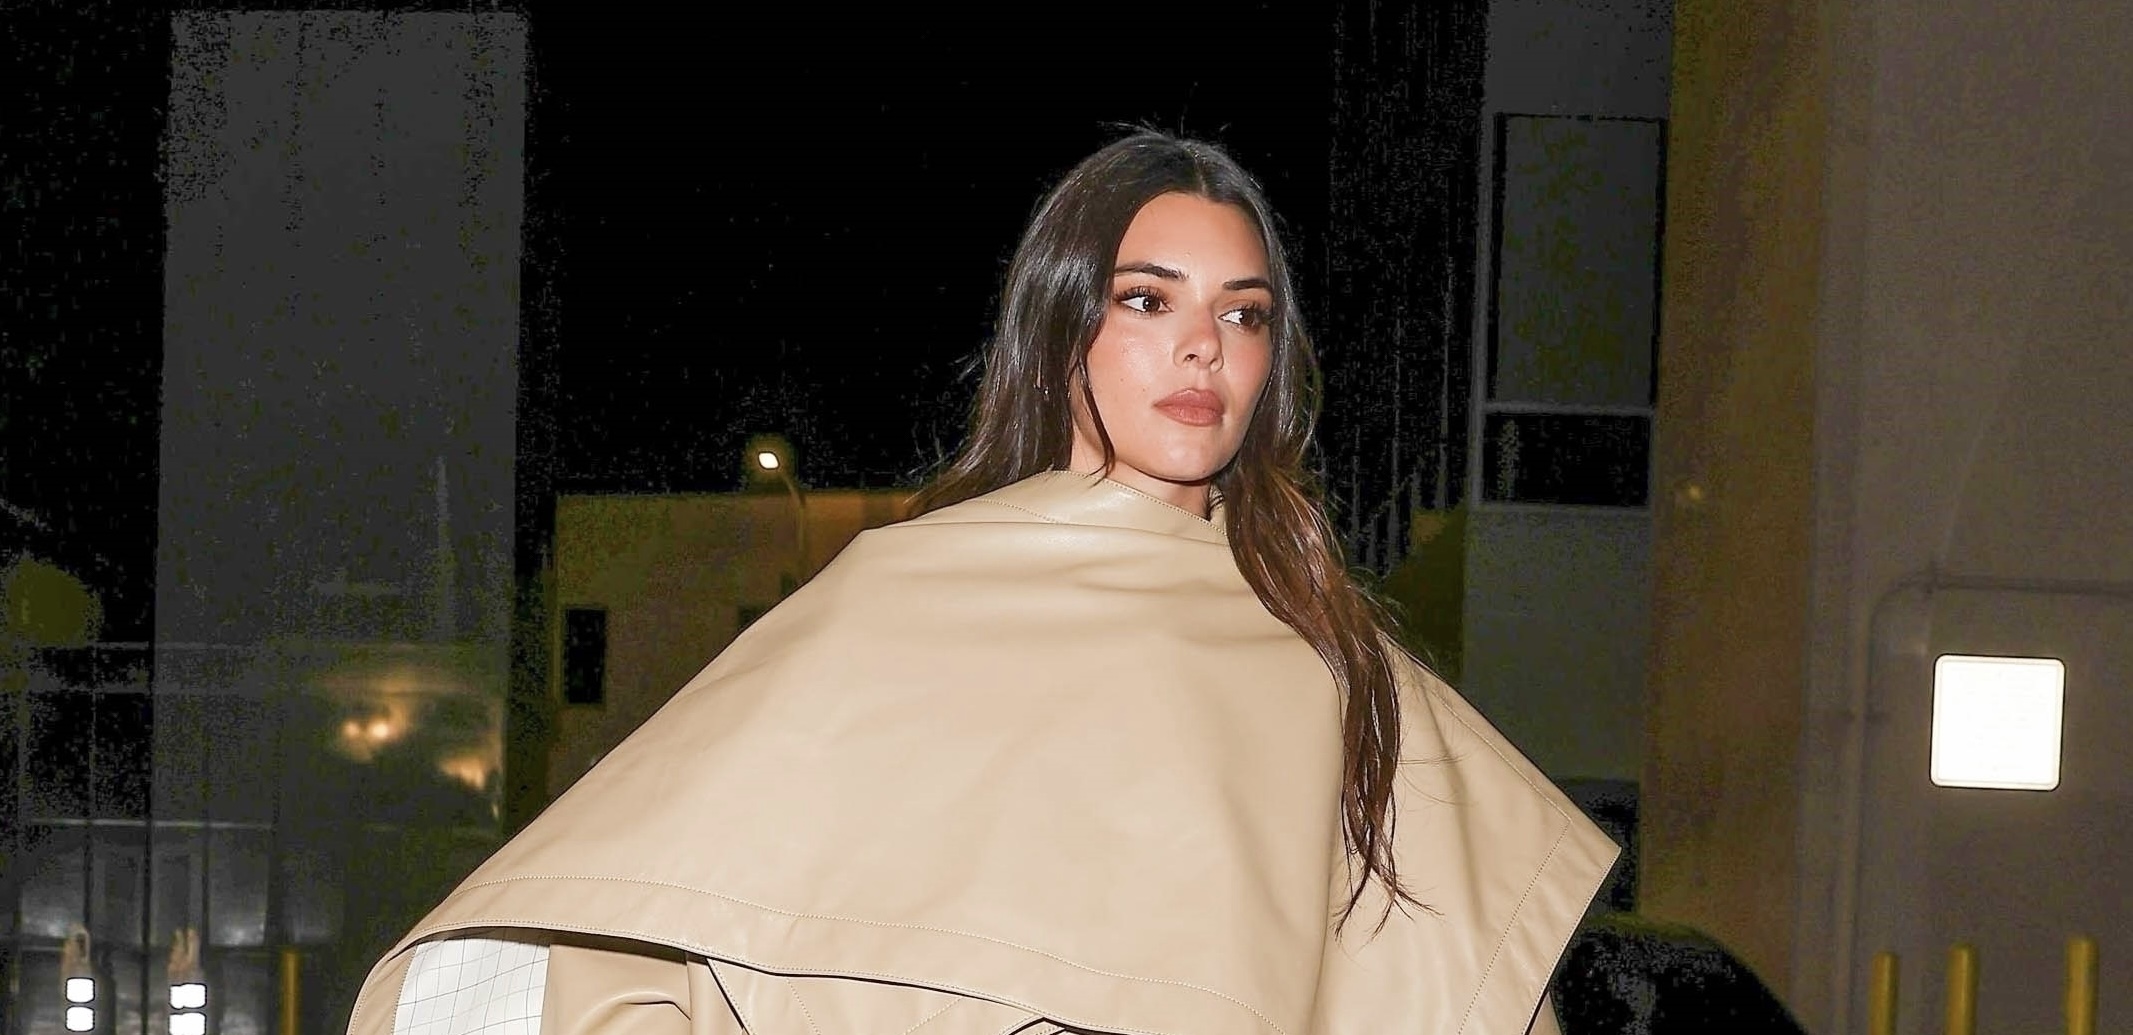 Supermodel Kendall Jenner leaving Wally’s Restaurant in Beverly Hills, wearing a Bottega Veneta leather trench coat, exuding high fashion and sophistication.